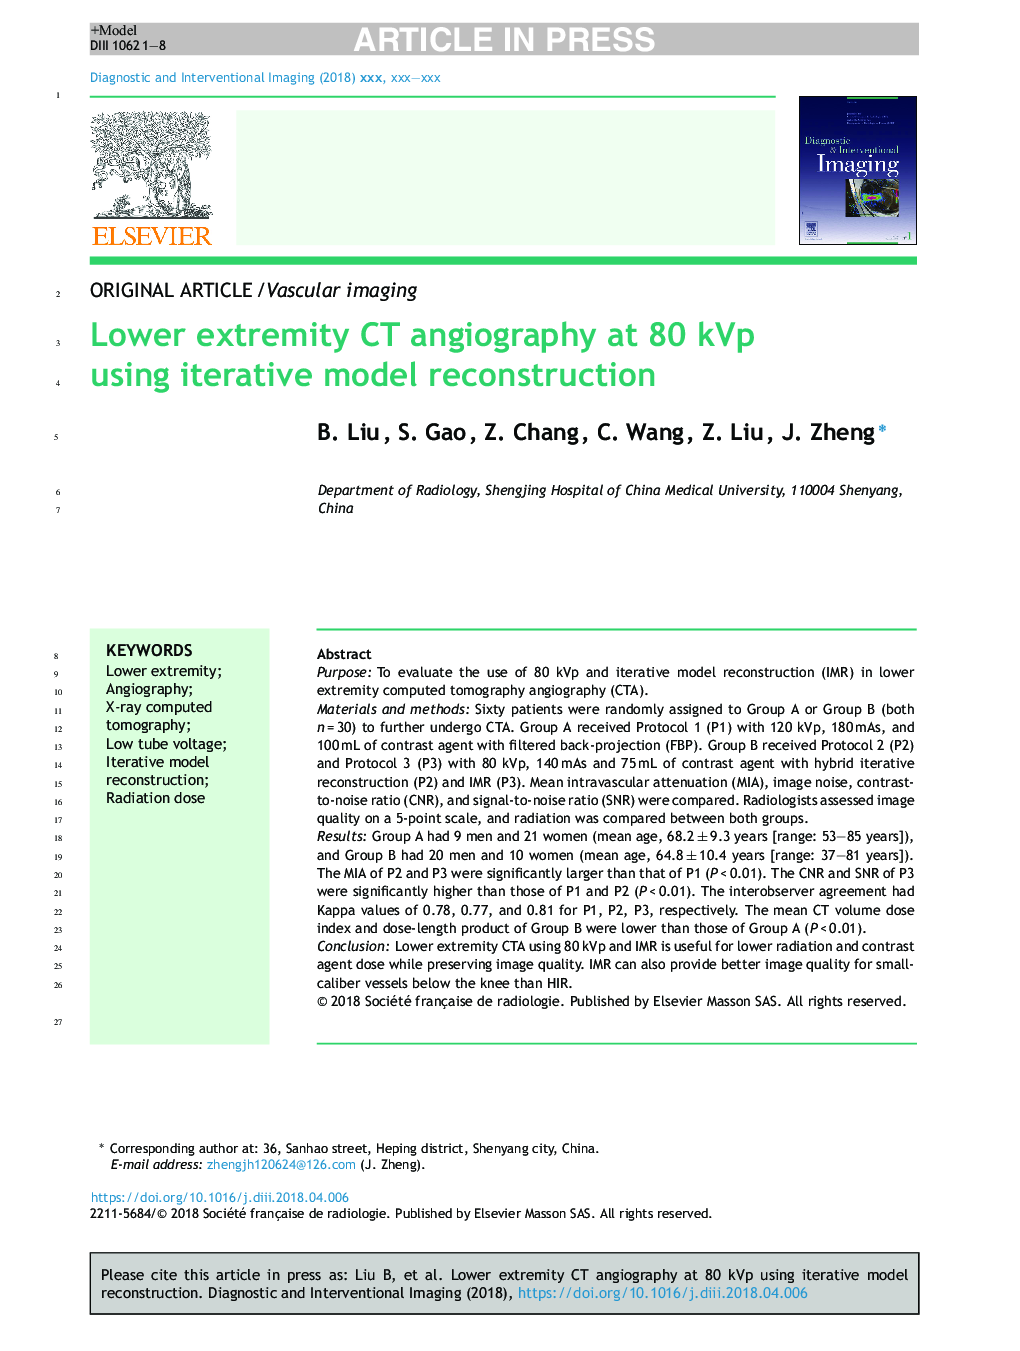 Lower extremity CT angiography at 80 kVp using iterative model reconstruction